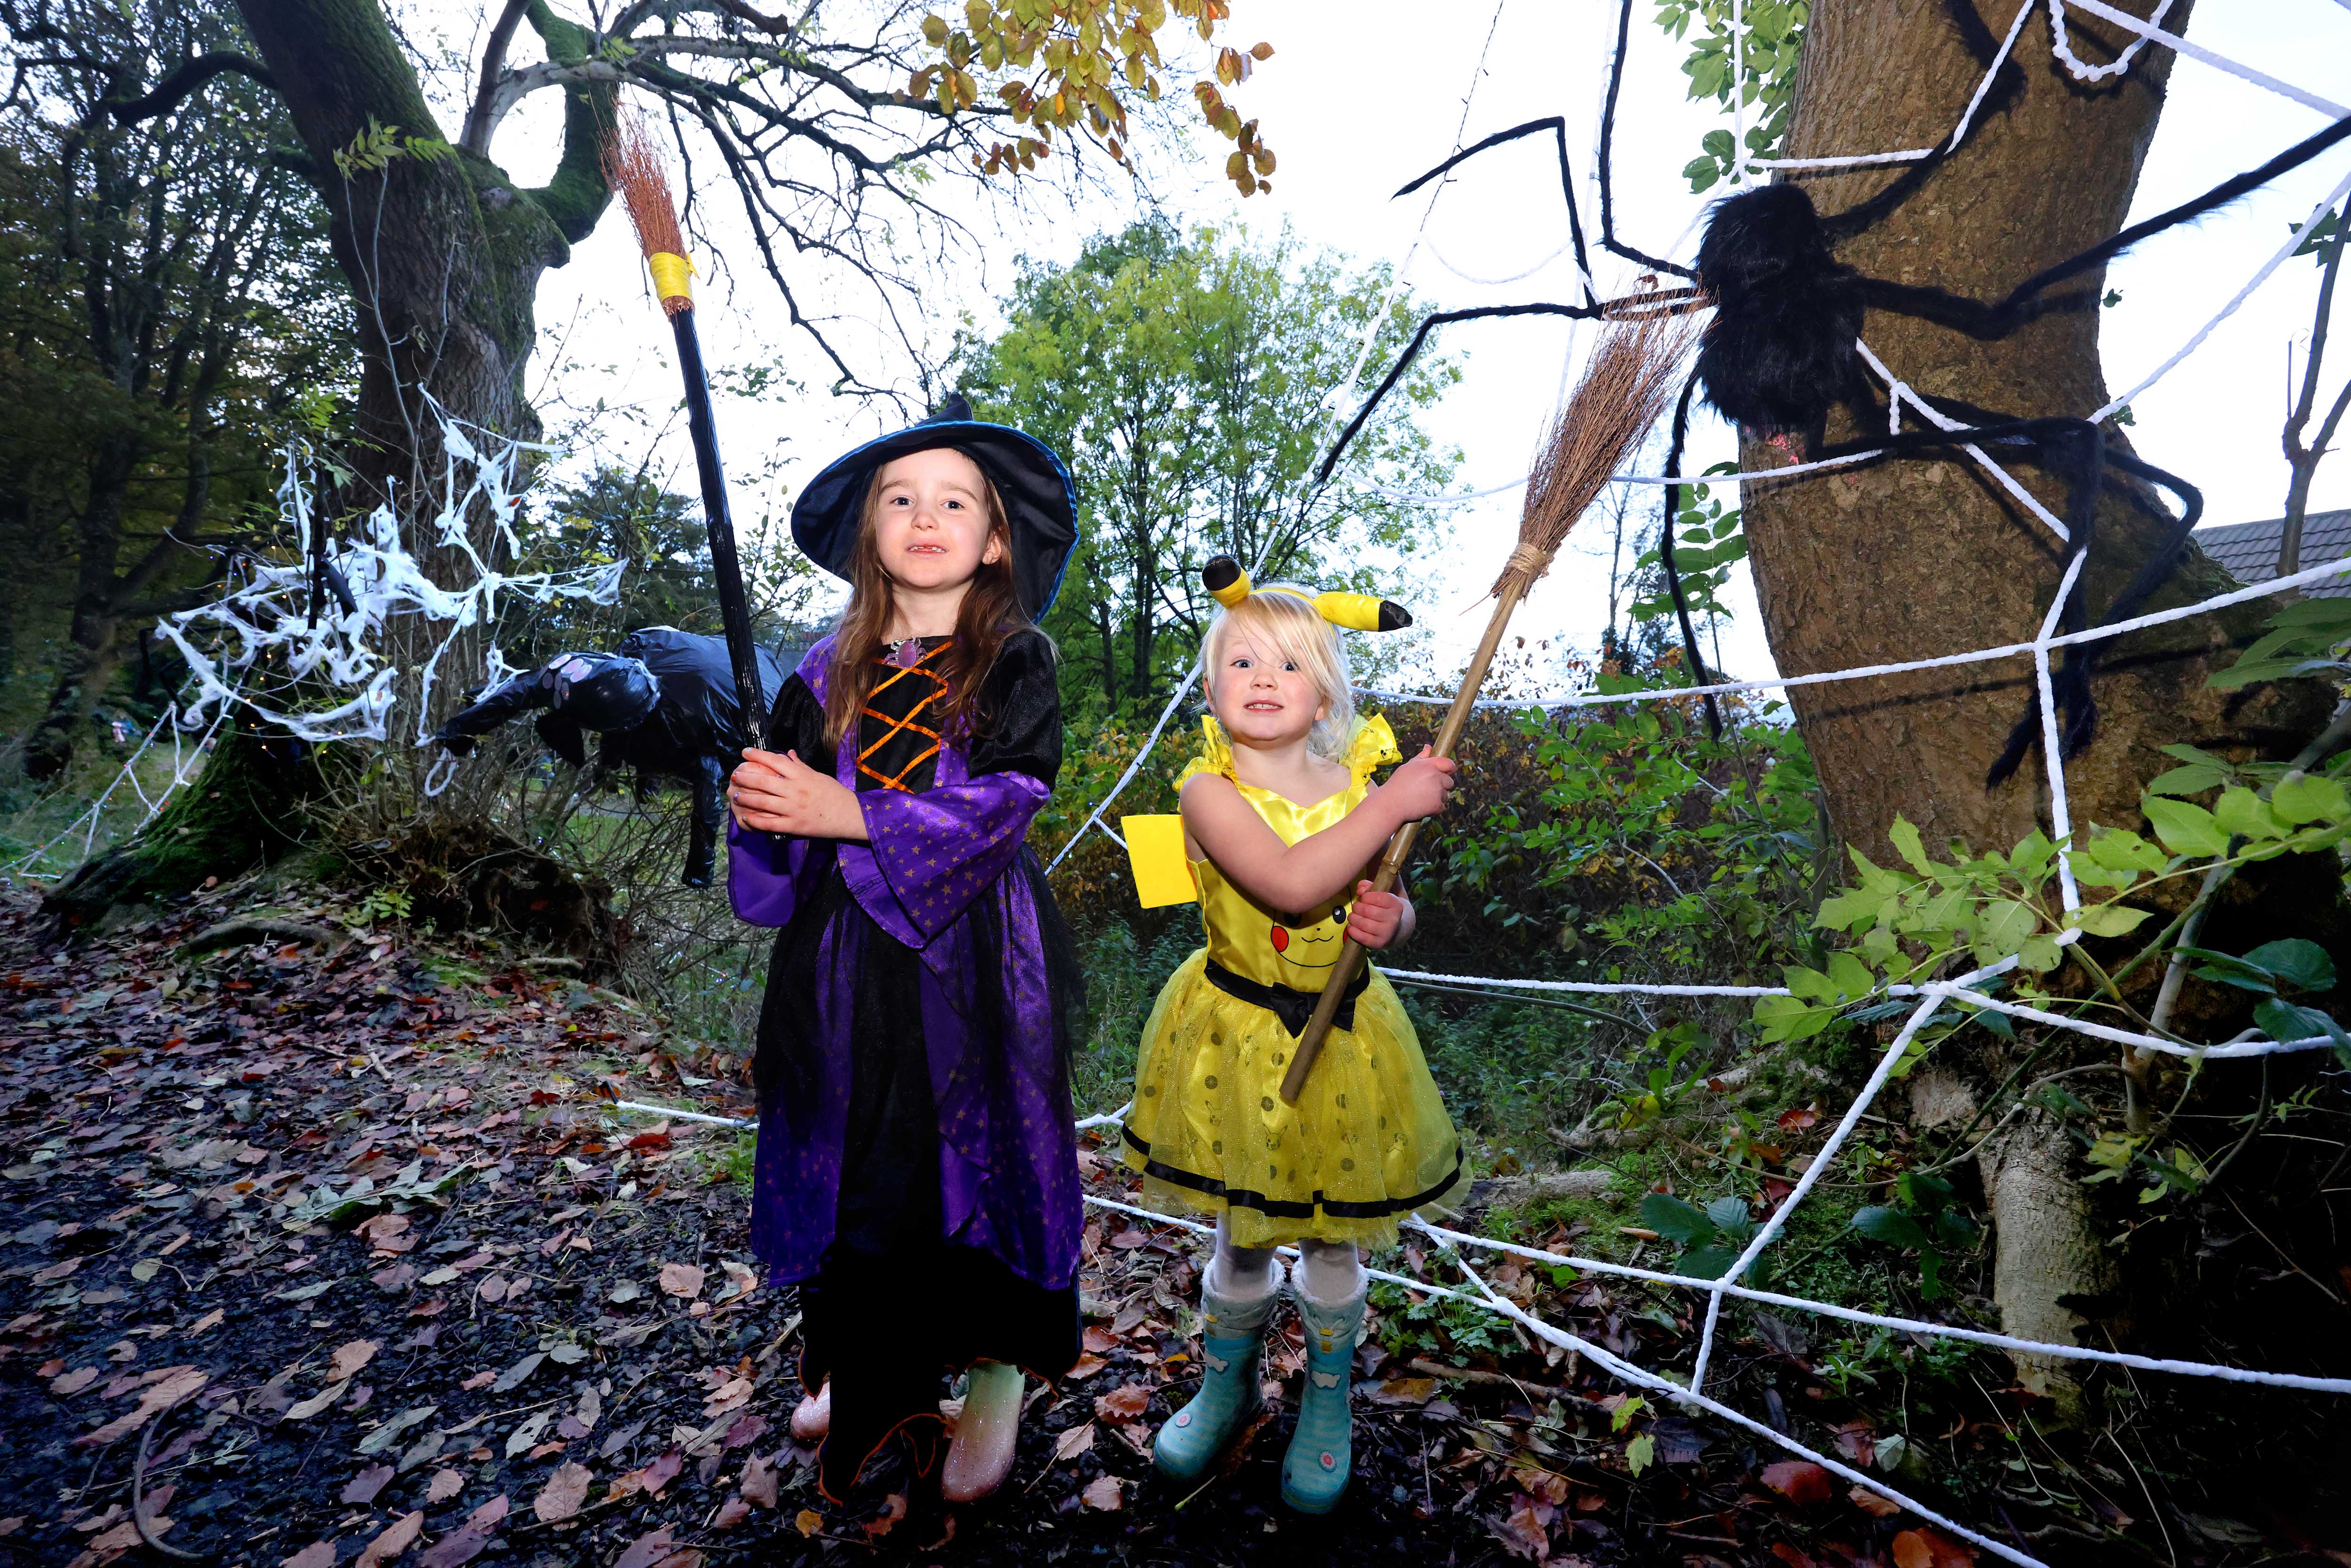 Cala Home's Linlithgow Spooky Lane raises £2,300 for primary school